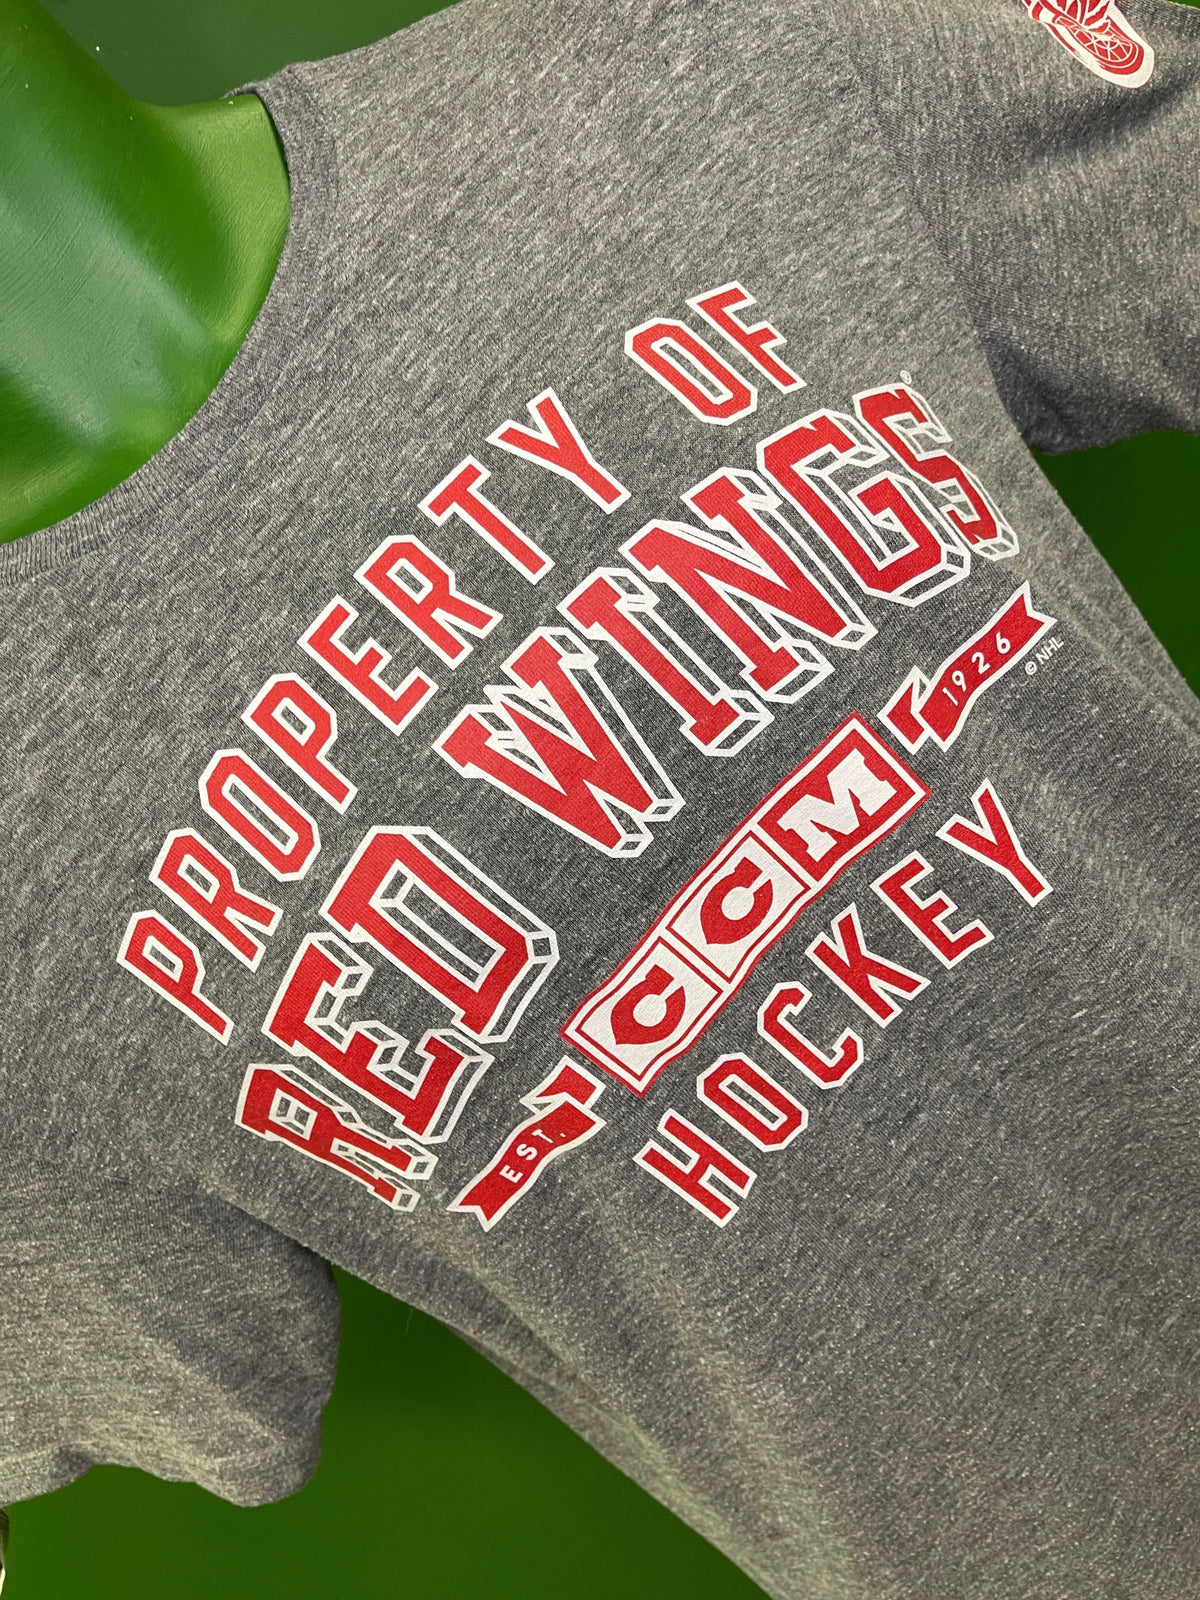 NHL Detroit Red Wings Grey T-Shirt Men's Small